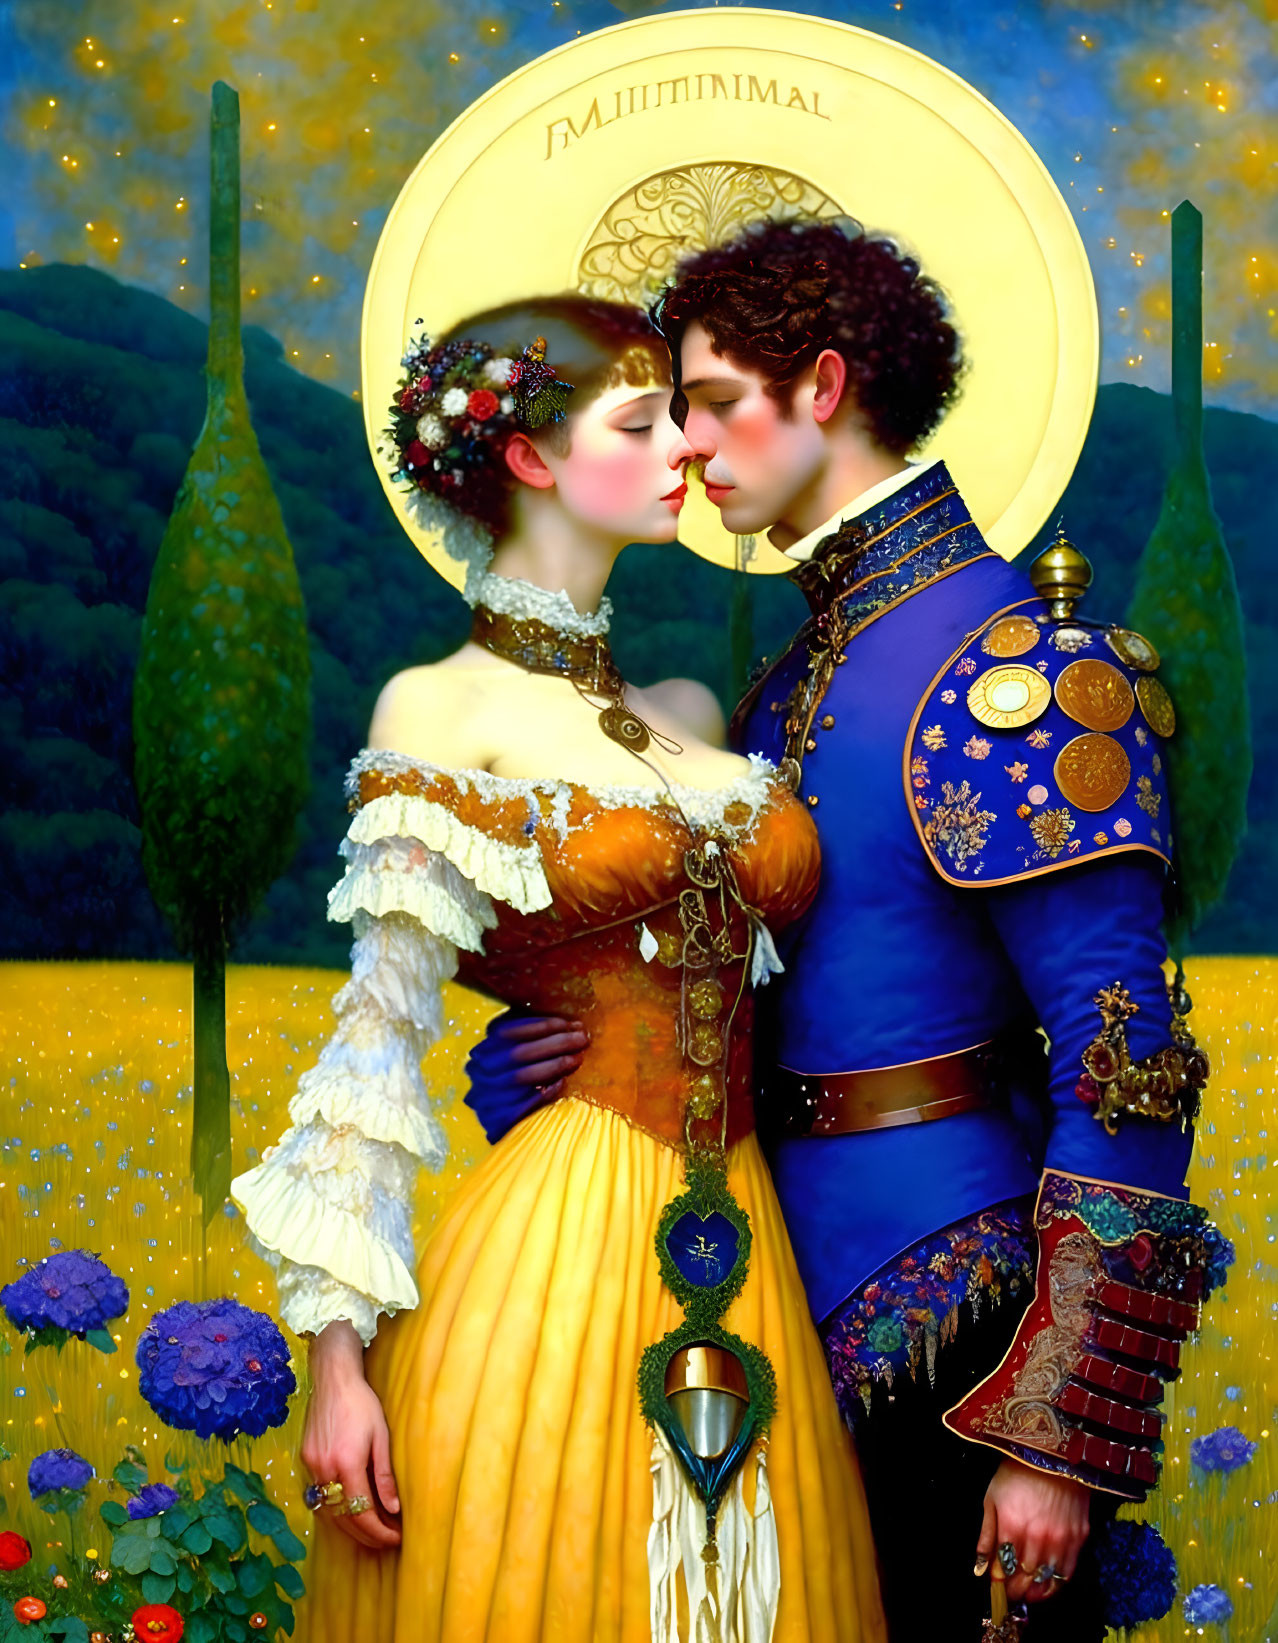 Historically inspired couple in elaborate costumes amidst yellow flower field